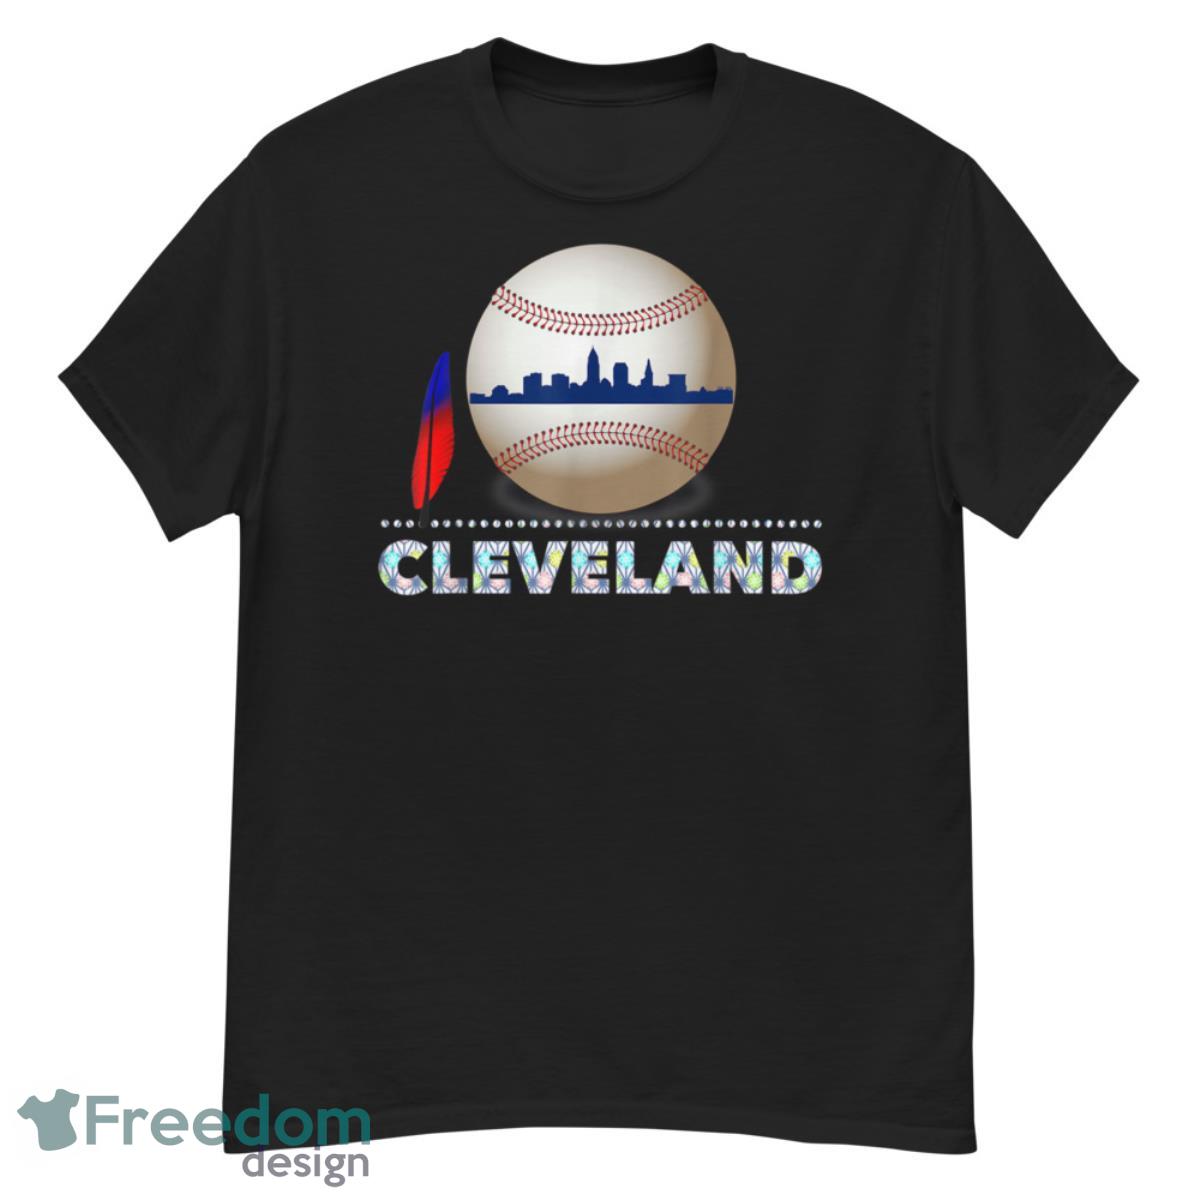 Cleveland Hometown Indian Tribe shirt Ball with Skyline - G500 Men’s Classic T-Shirt